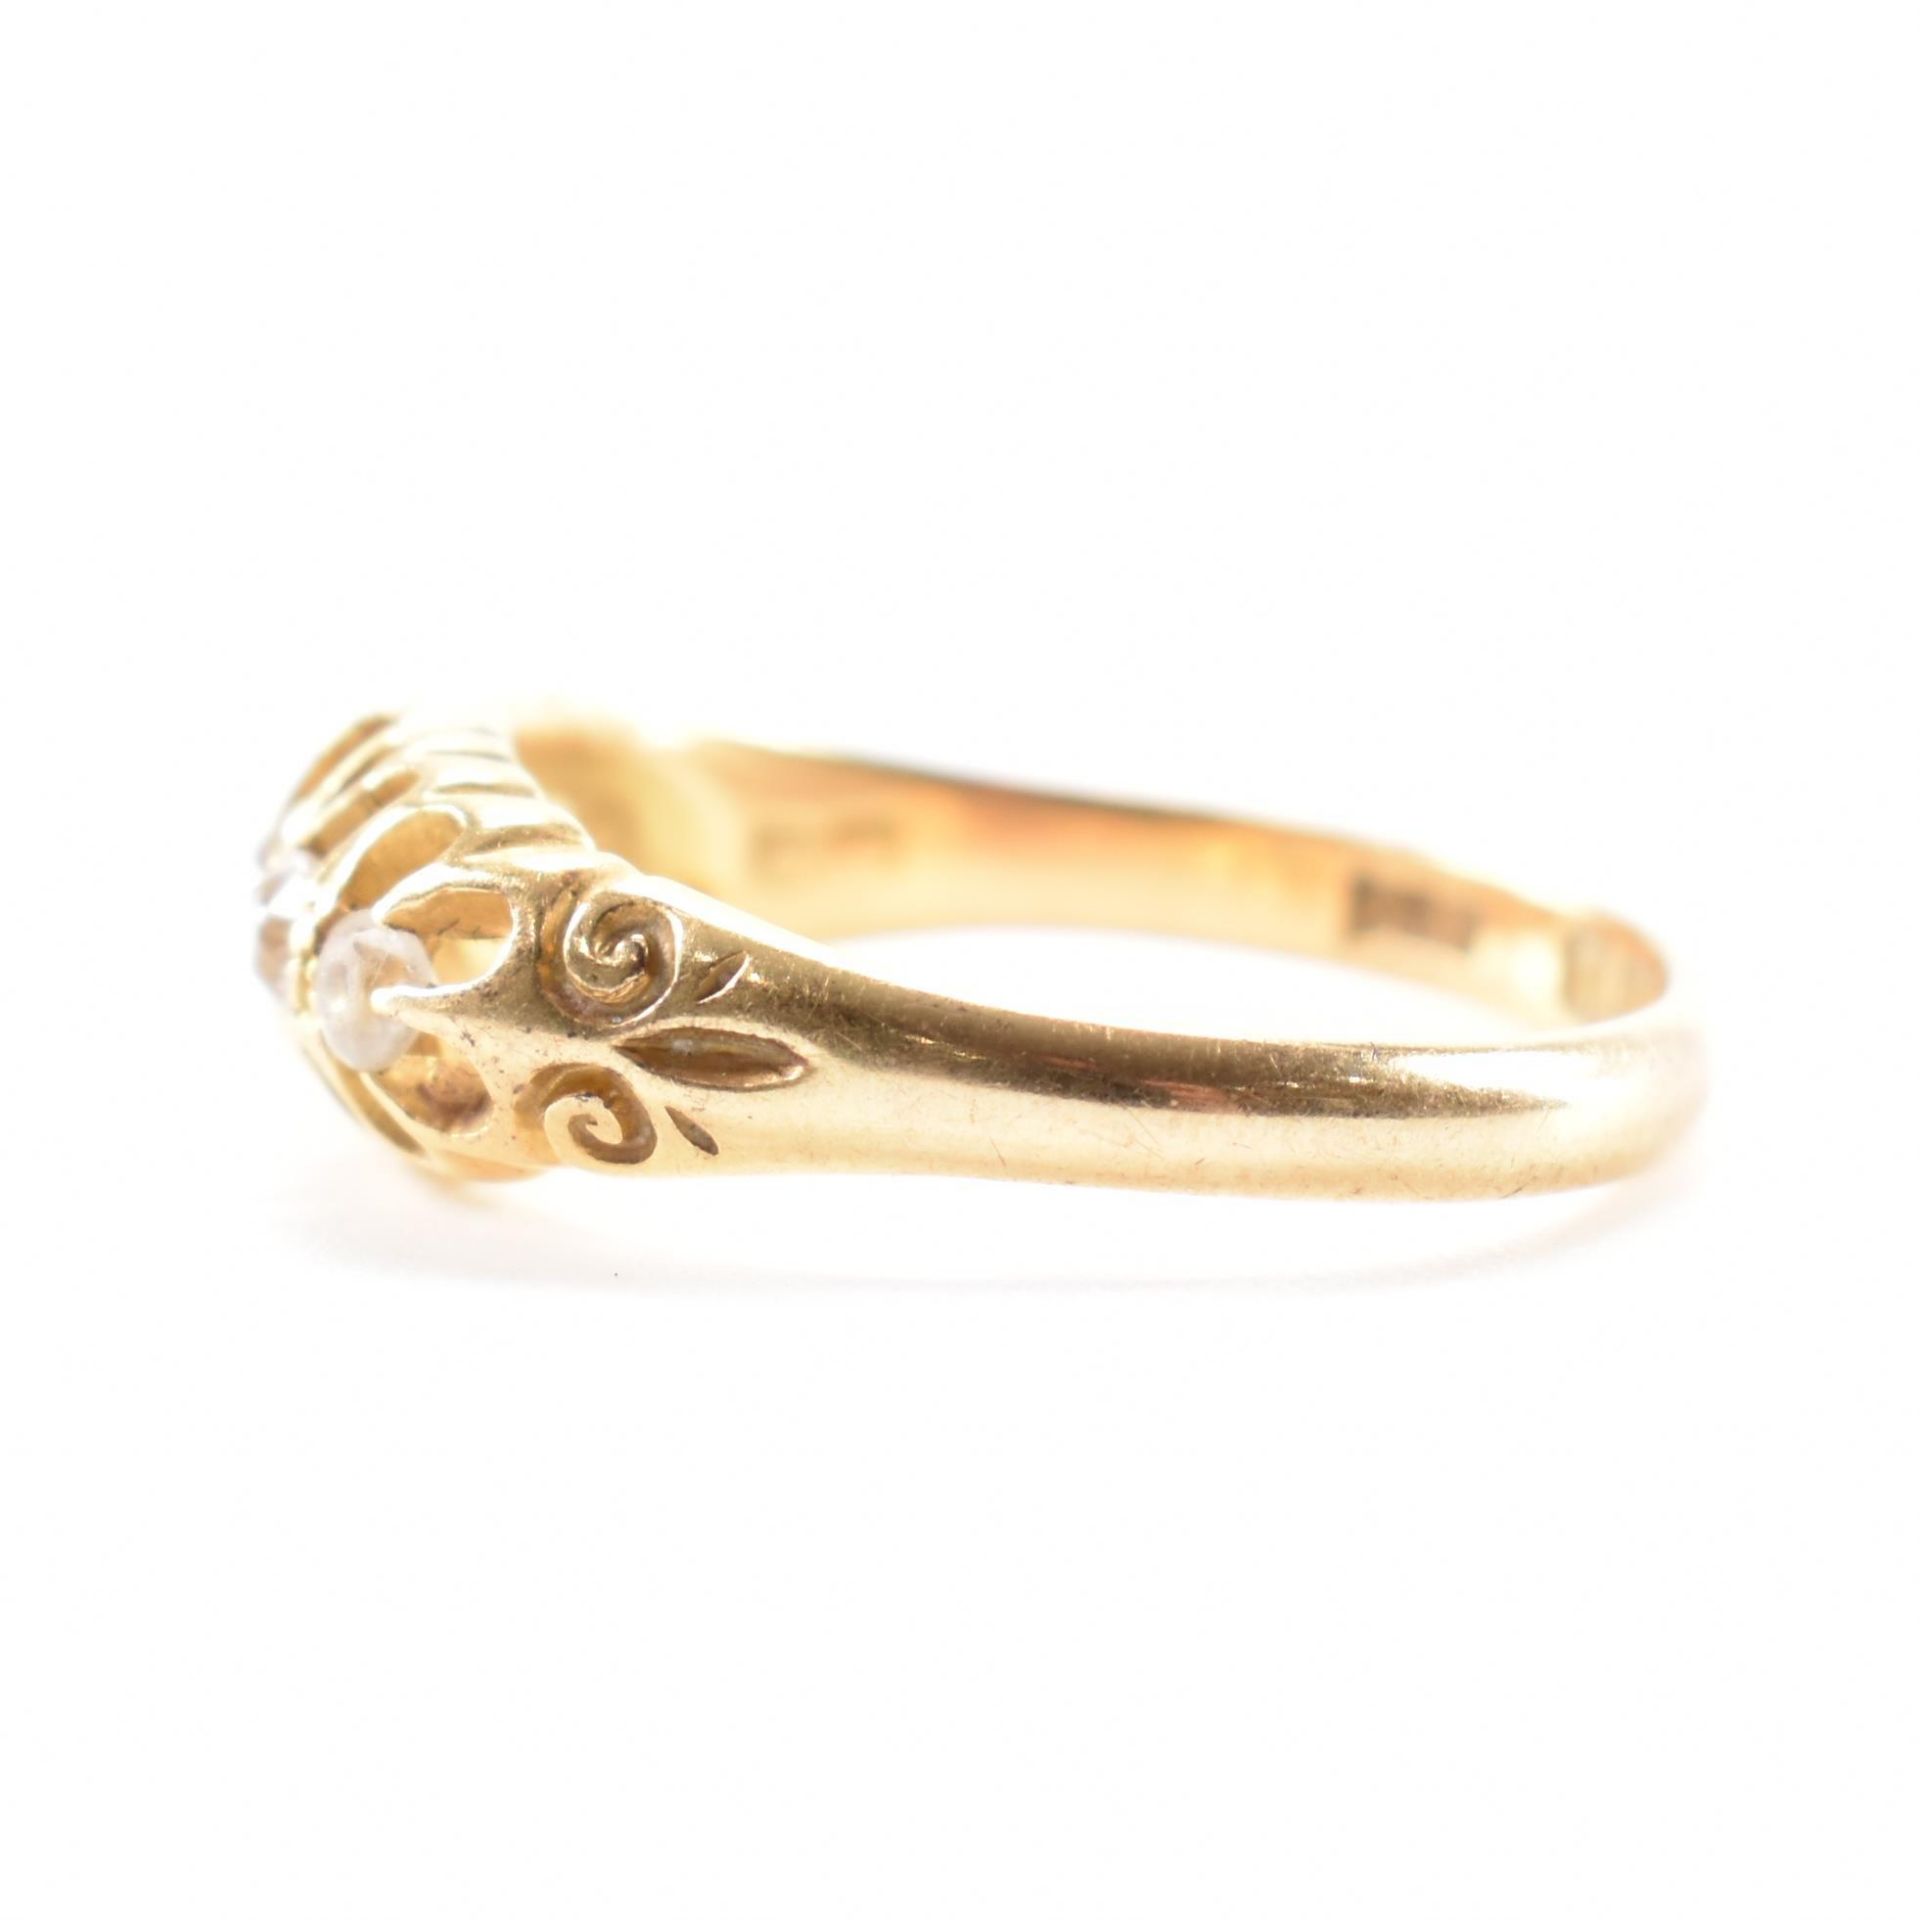 HALLMARKED 18CT GOLD FIVE STONE RING - Image 2 of 9